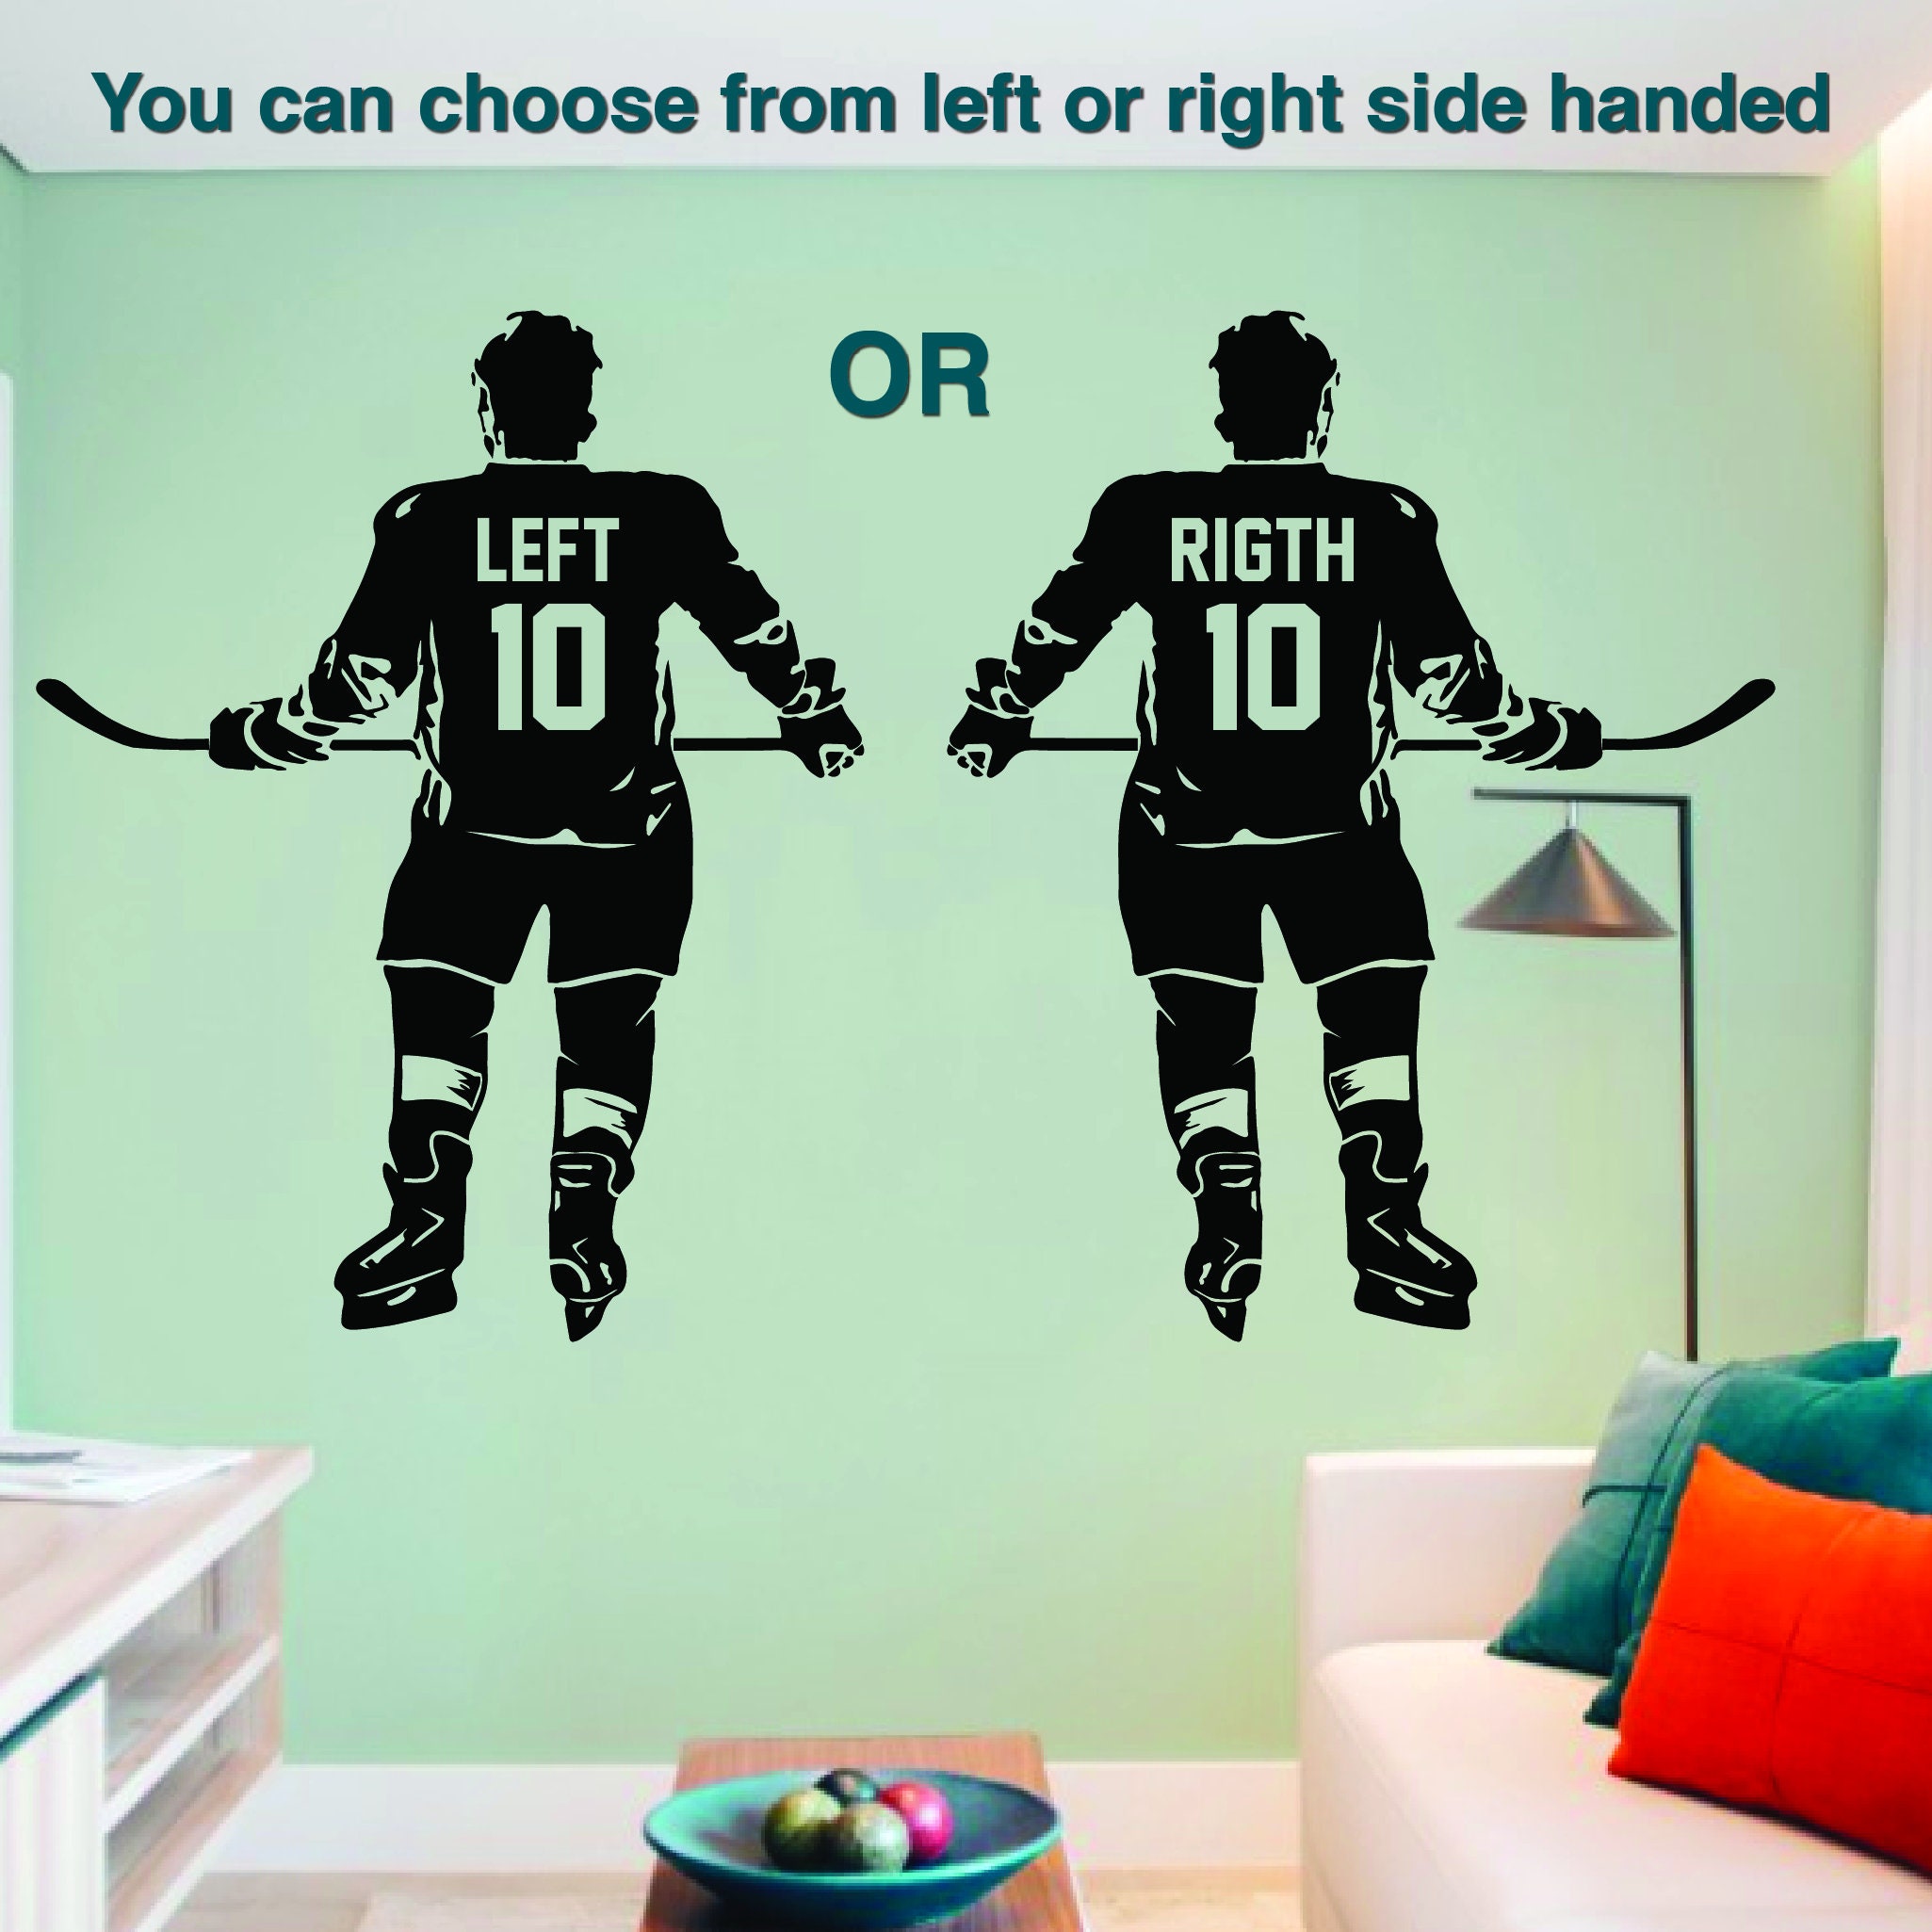 Colorado Avalanche: Bernie 2021 Mascot - NHL Removable Wall Adhesive Wall Decal Giant Athlete +2 Wall Decals 21W x 51H